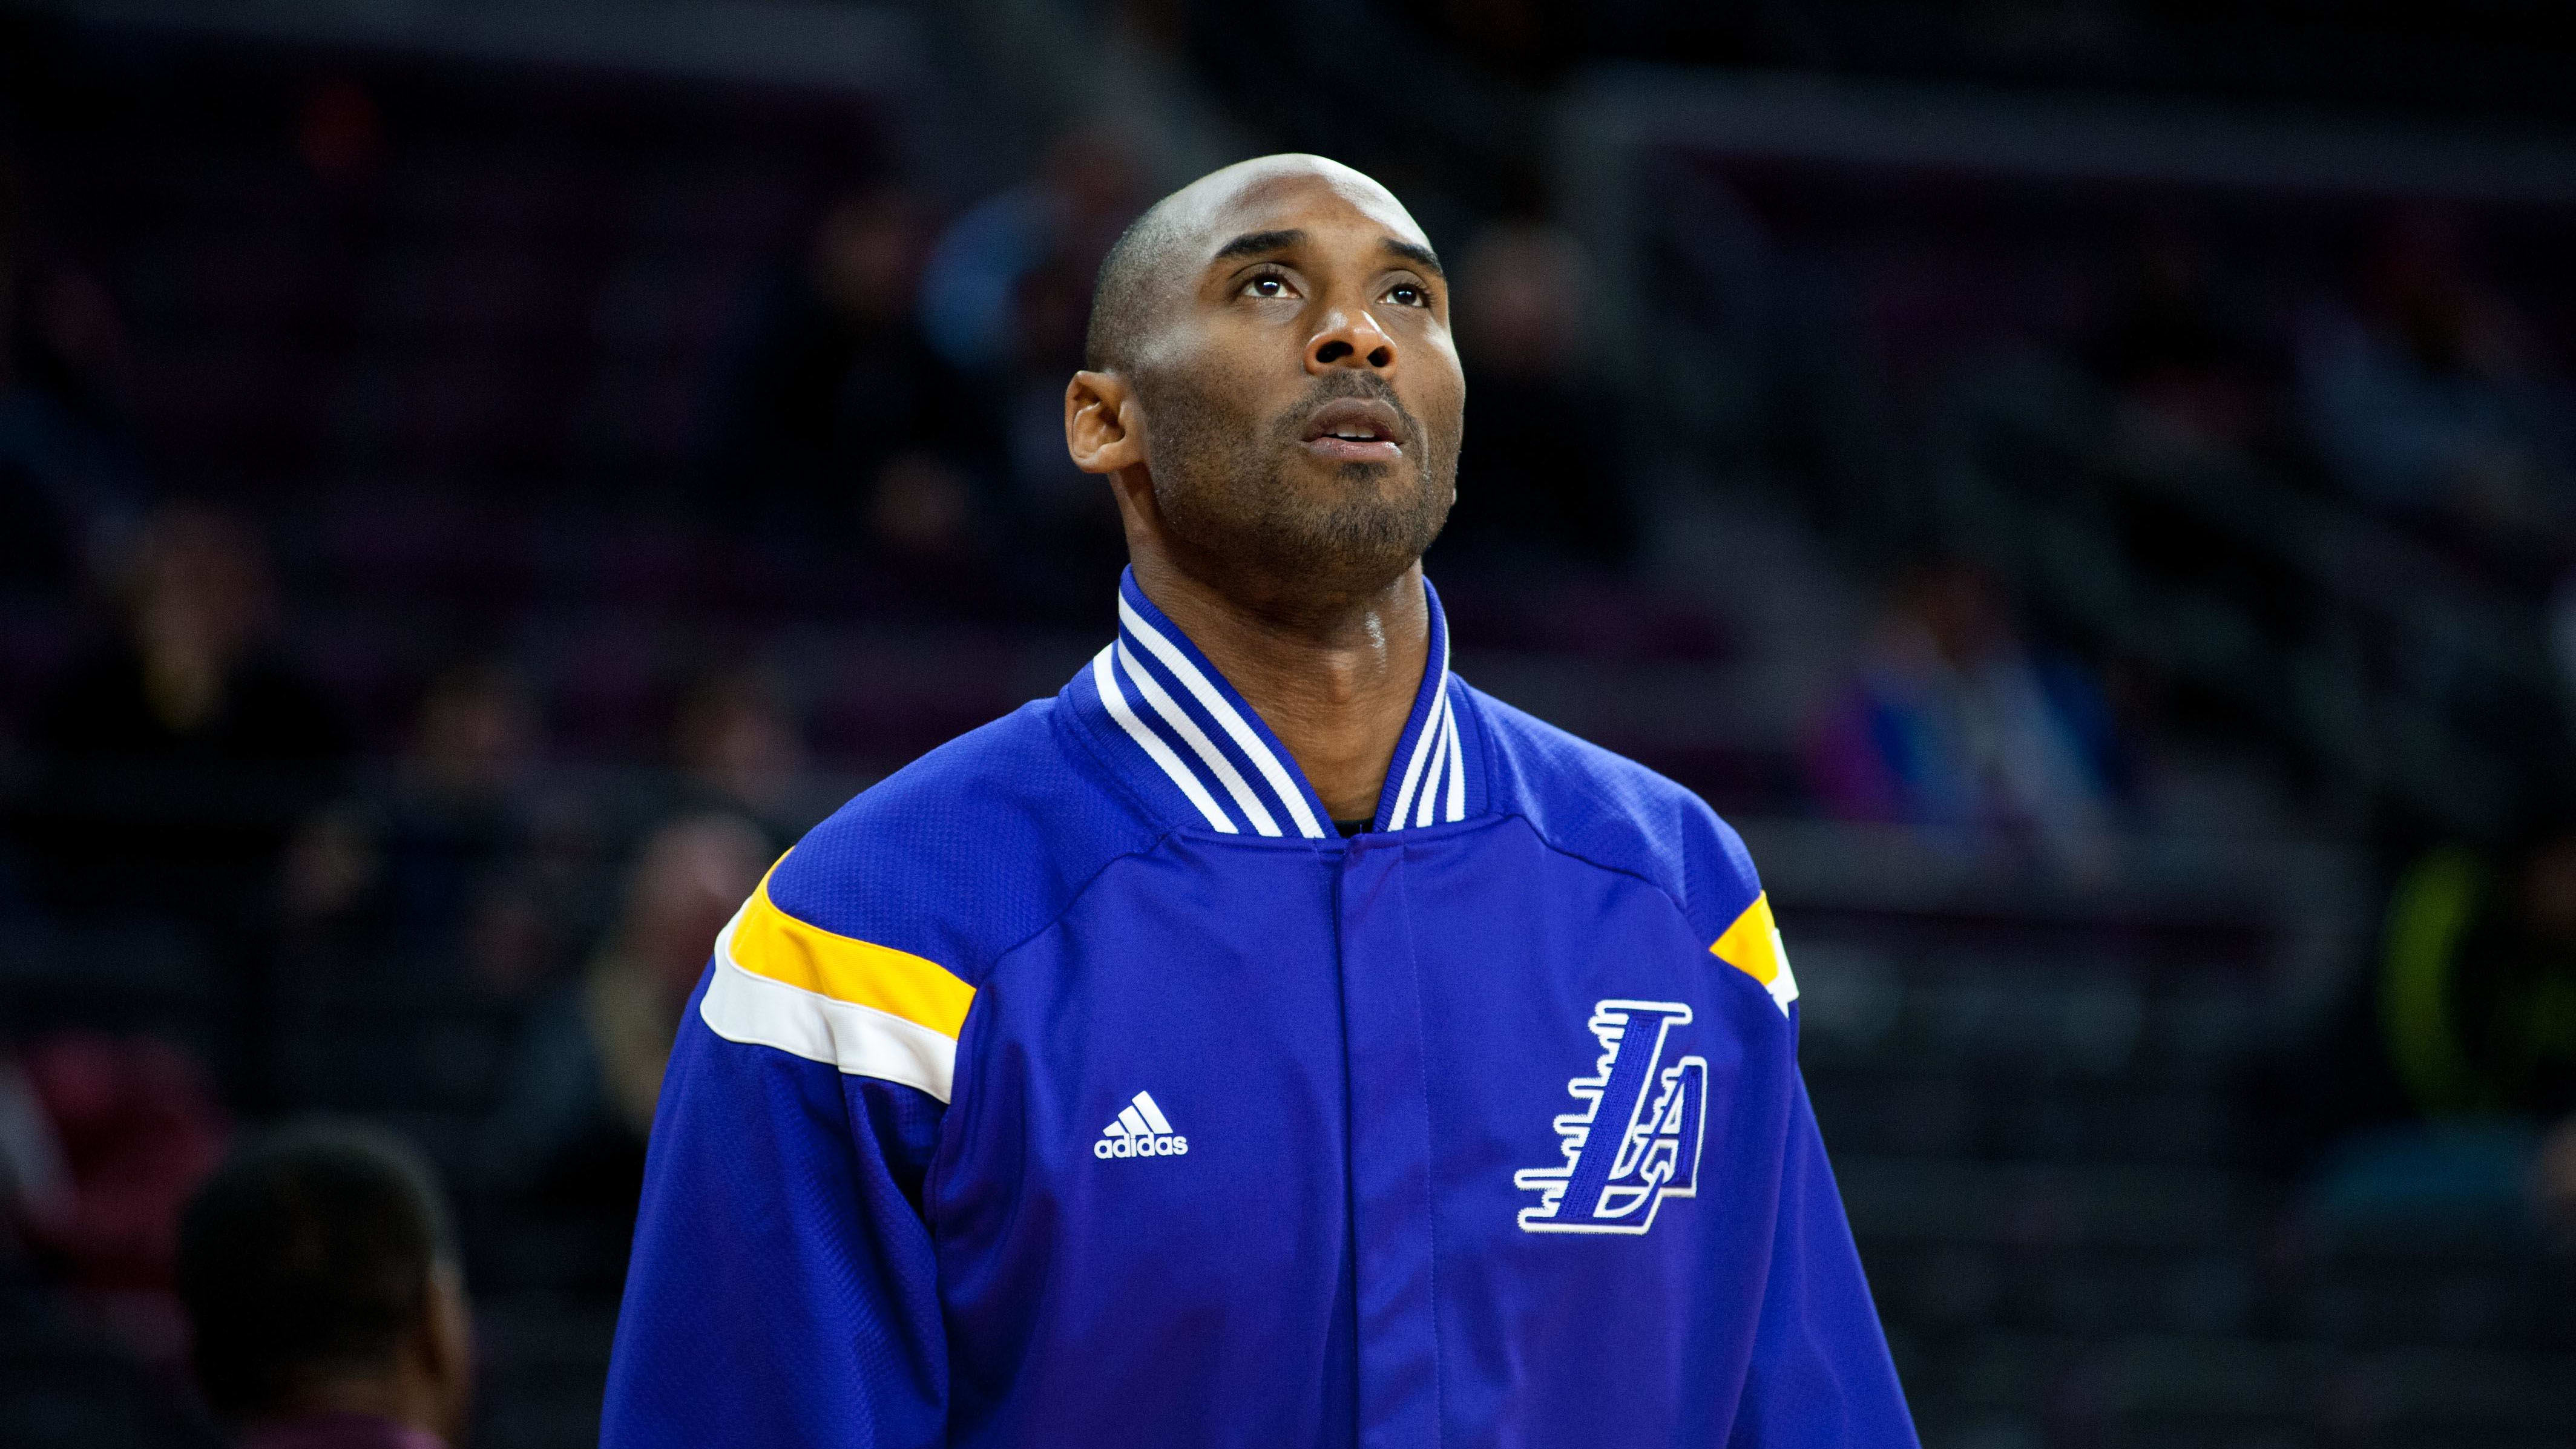 Los Angeles Lakers guard Kobe Bryant warms up before an NBA game.